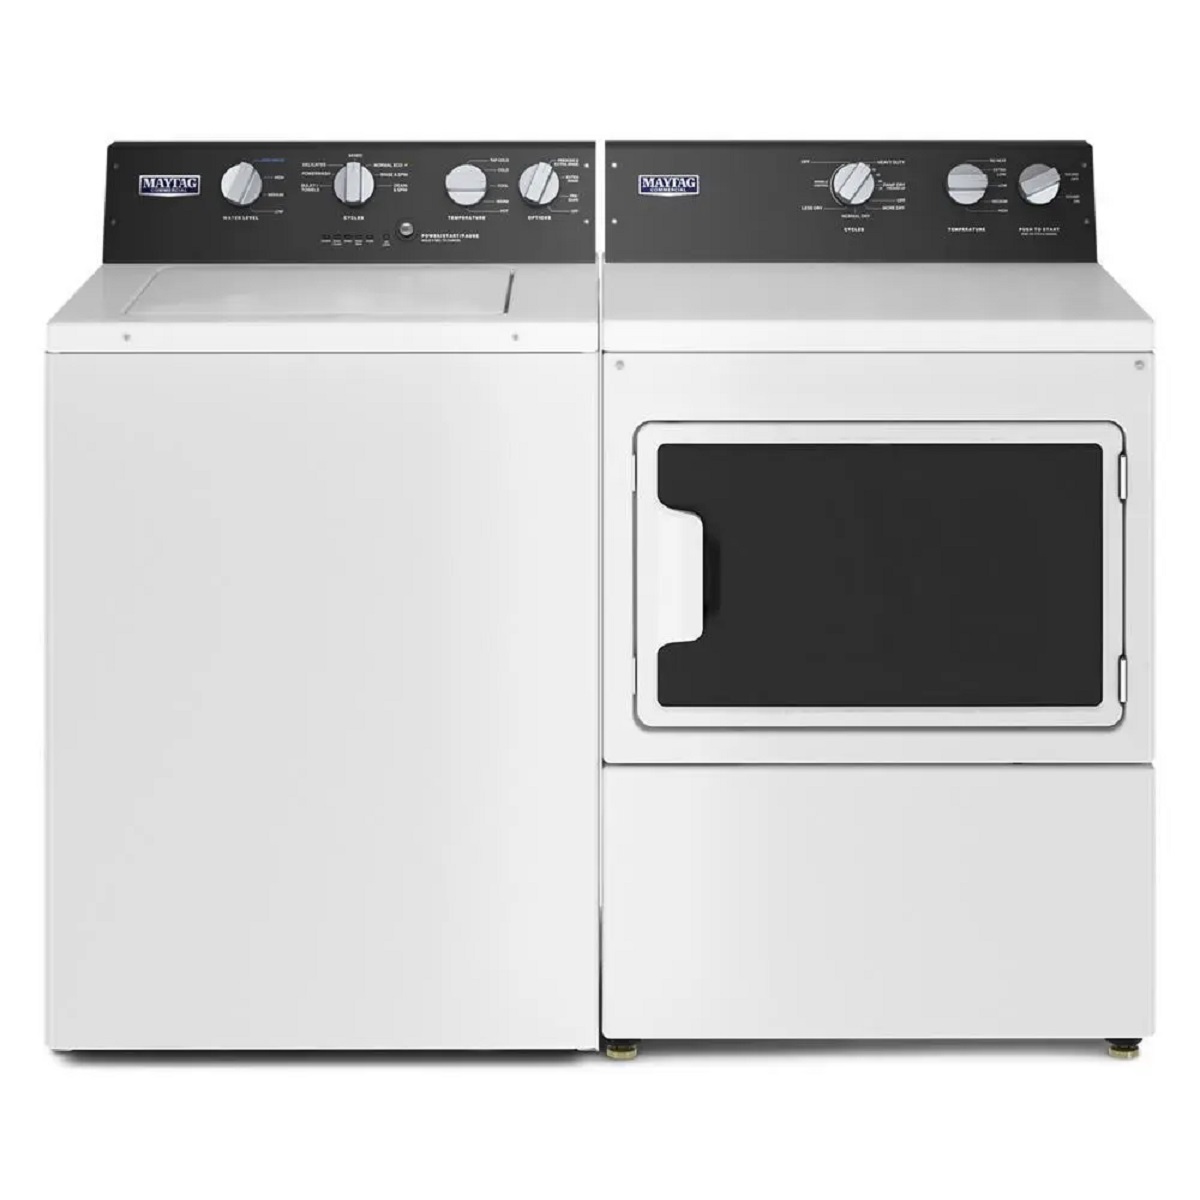 New Maytag Washer Making Loud Noise When Agitating